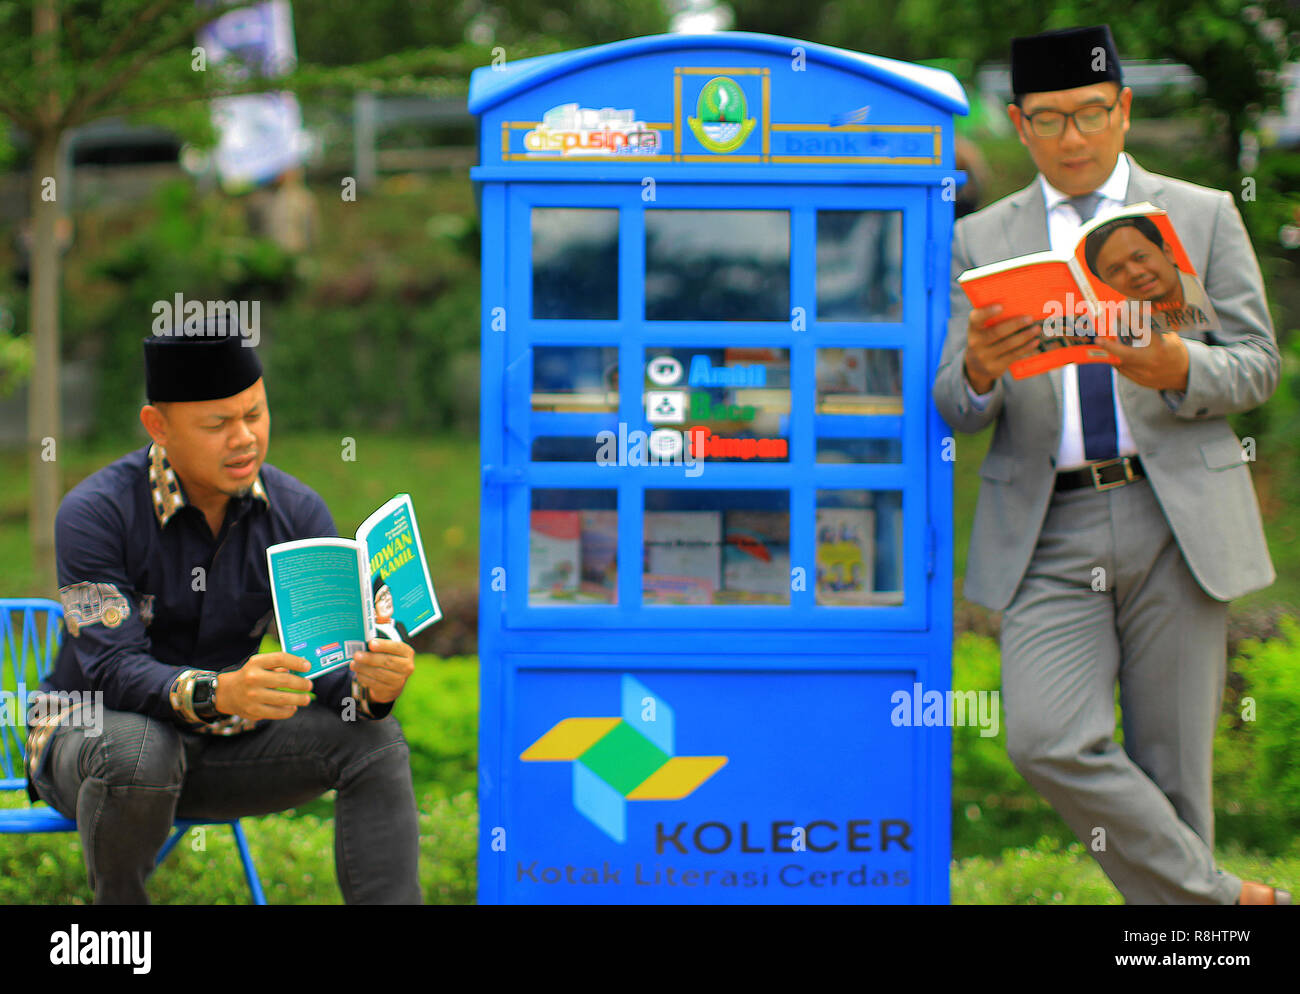 West Java Governor Ridwan Kamil (right) with Bogor Mayor Bima Arya (left) read a book during the launch of the Smart Literacy Box (Kolecer) service in Sempur Park. Kolecer, which was launched by the Regional Archives Library Office (Dispusipda) of West Java Province in the form of a mini library in a public space capable of loading 80 books as a form of innovation so that people can fill their time by reading. Stock Photo